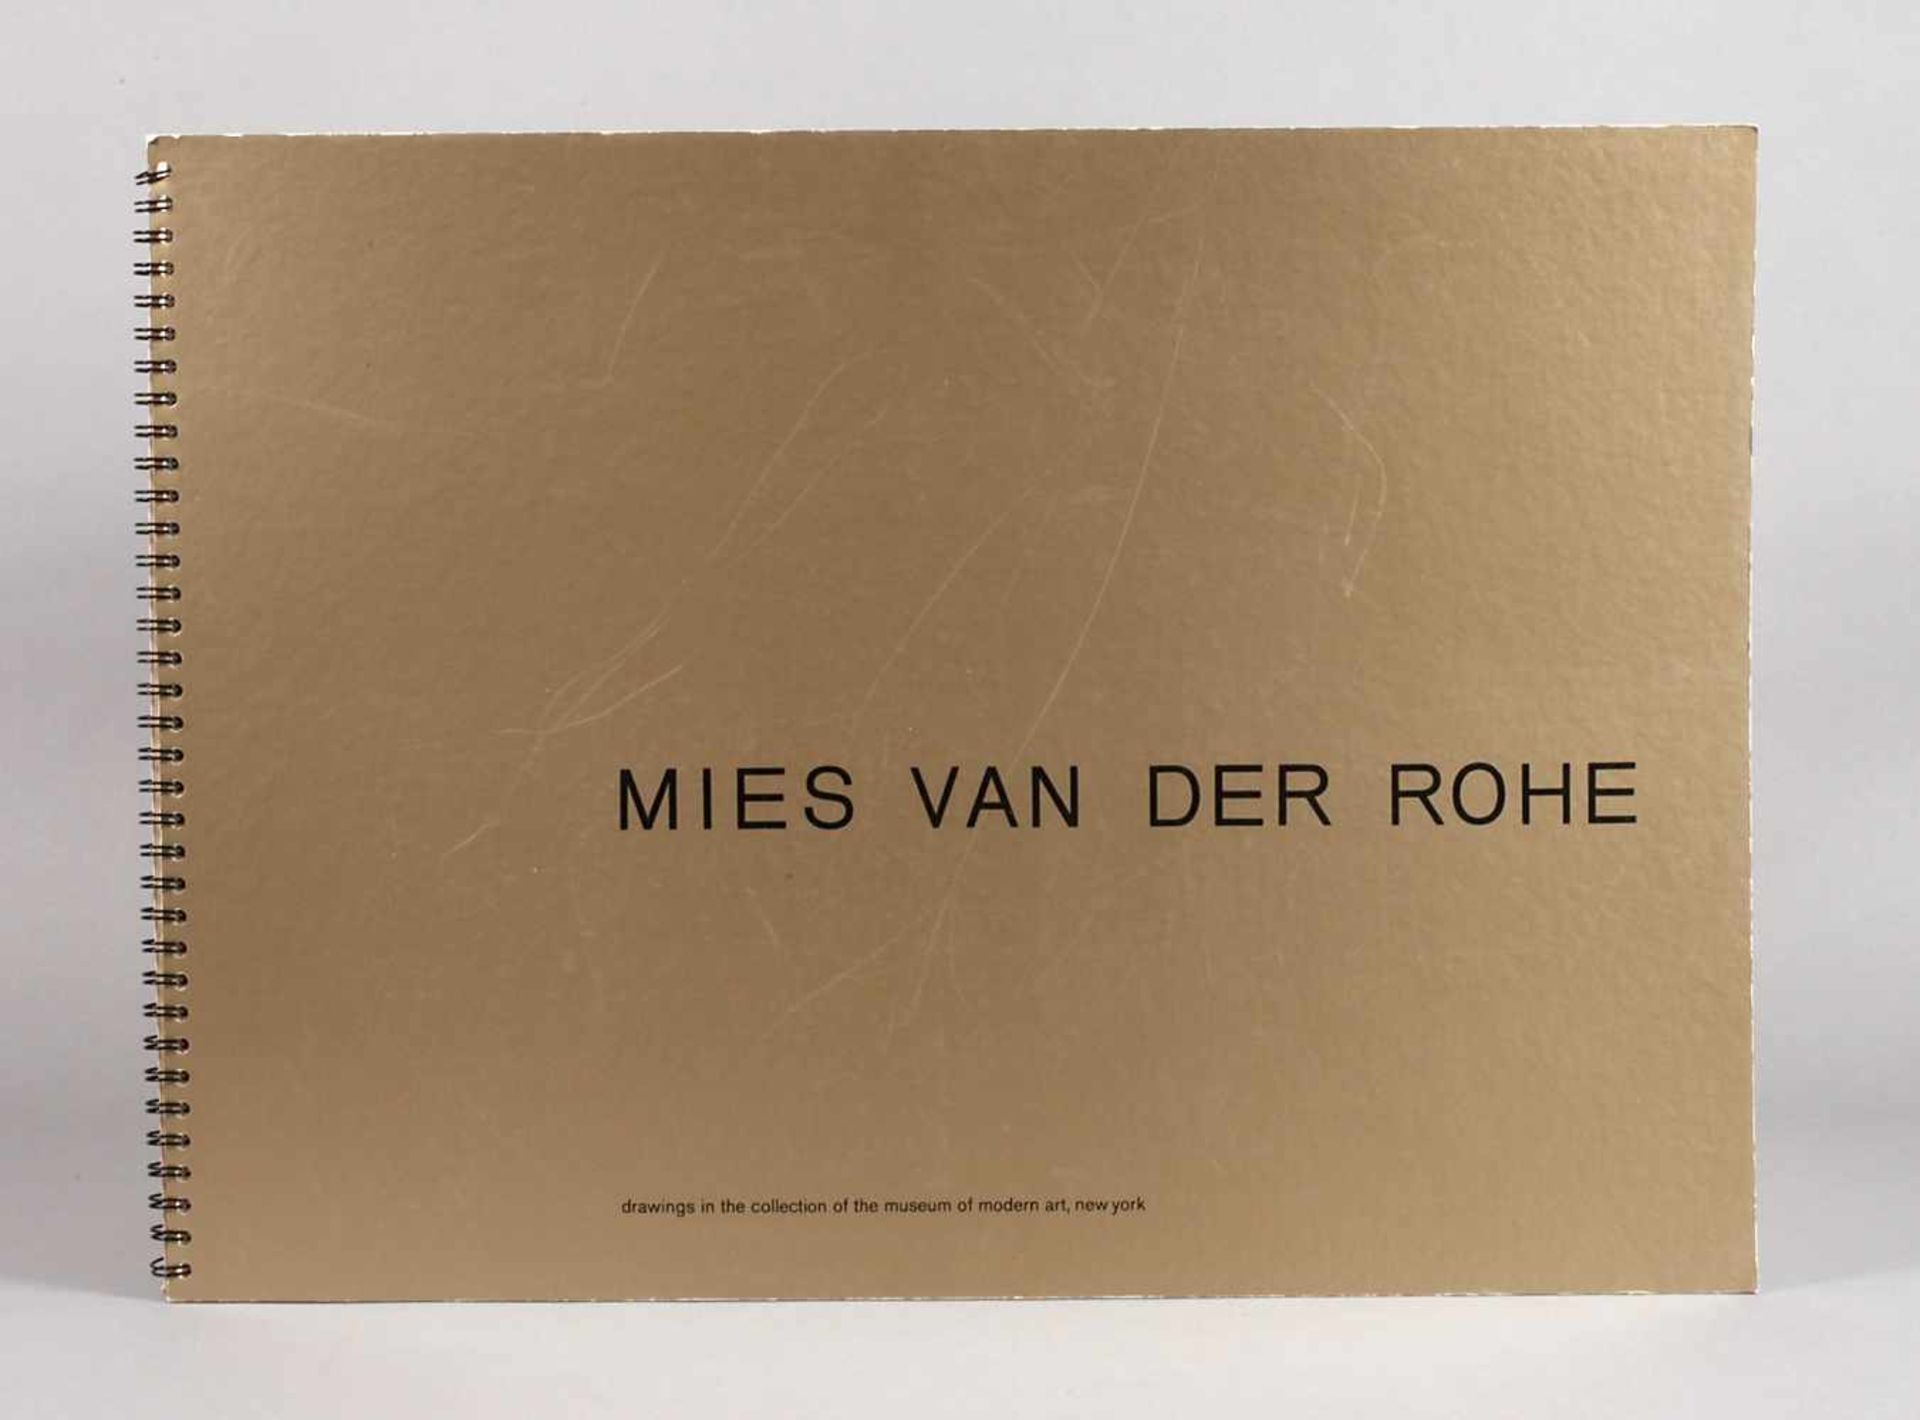 Mies van der Rohedrawings in the collection of the museum of modern art New York [1969],